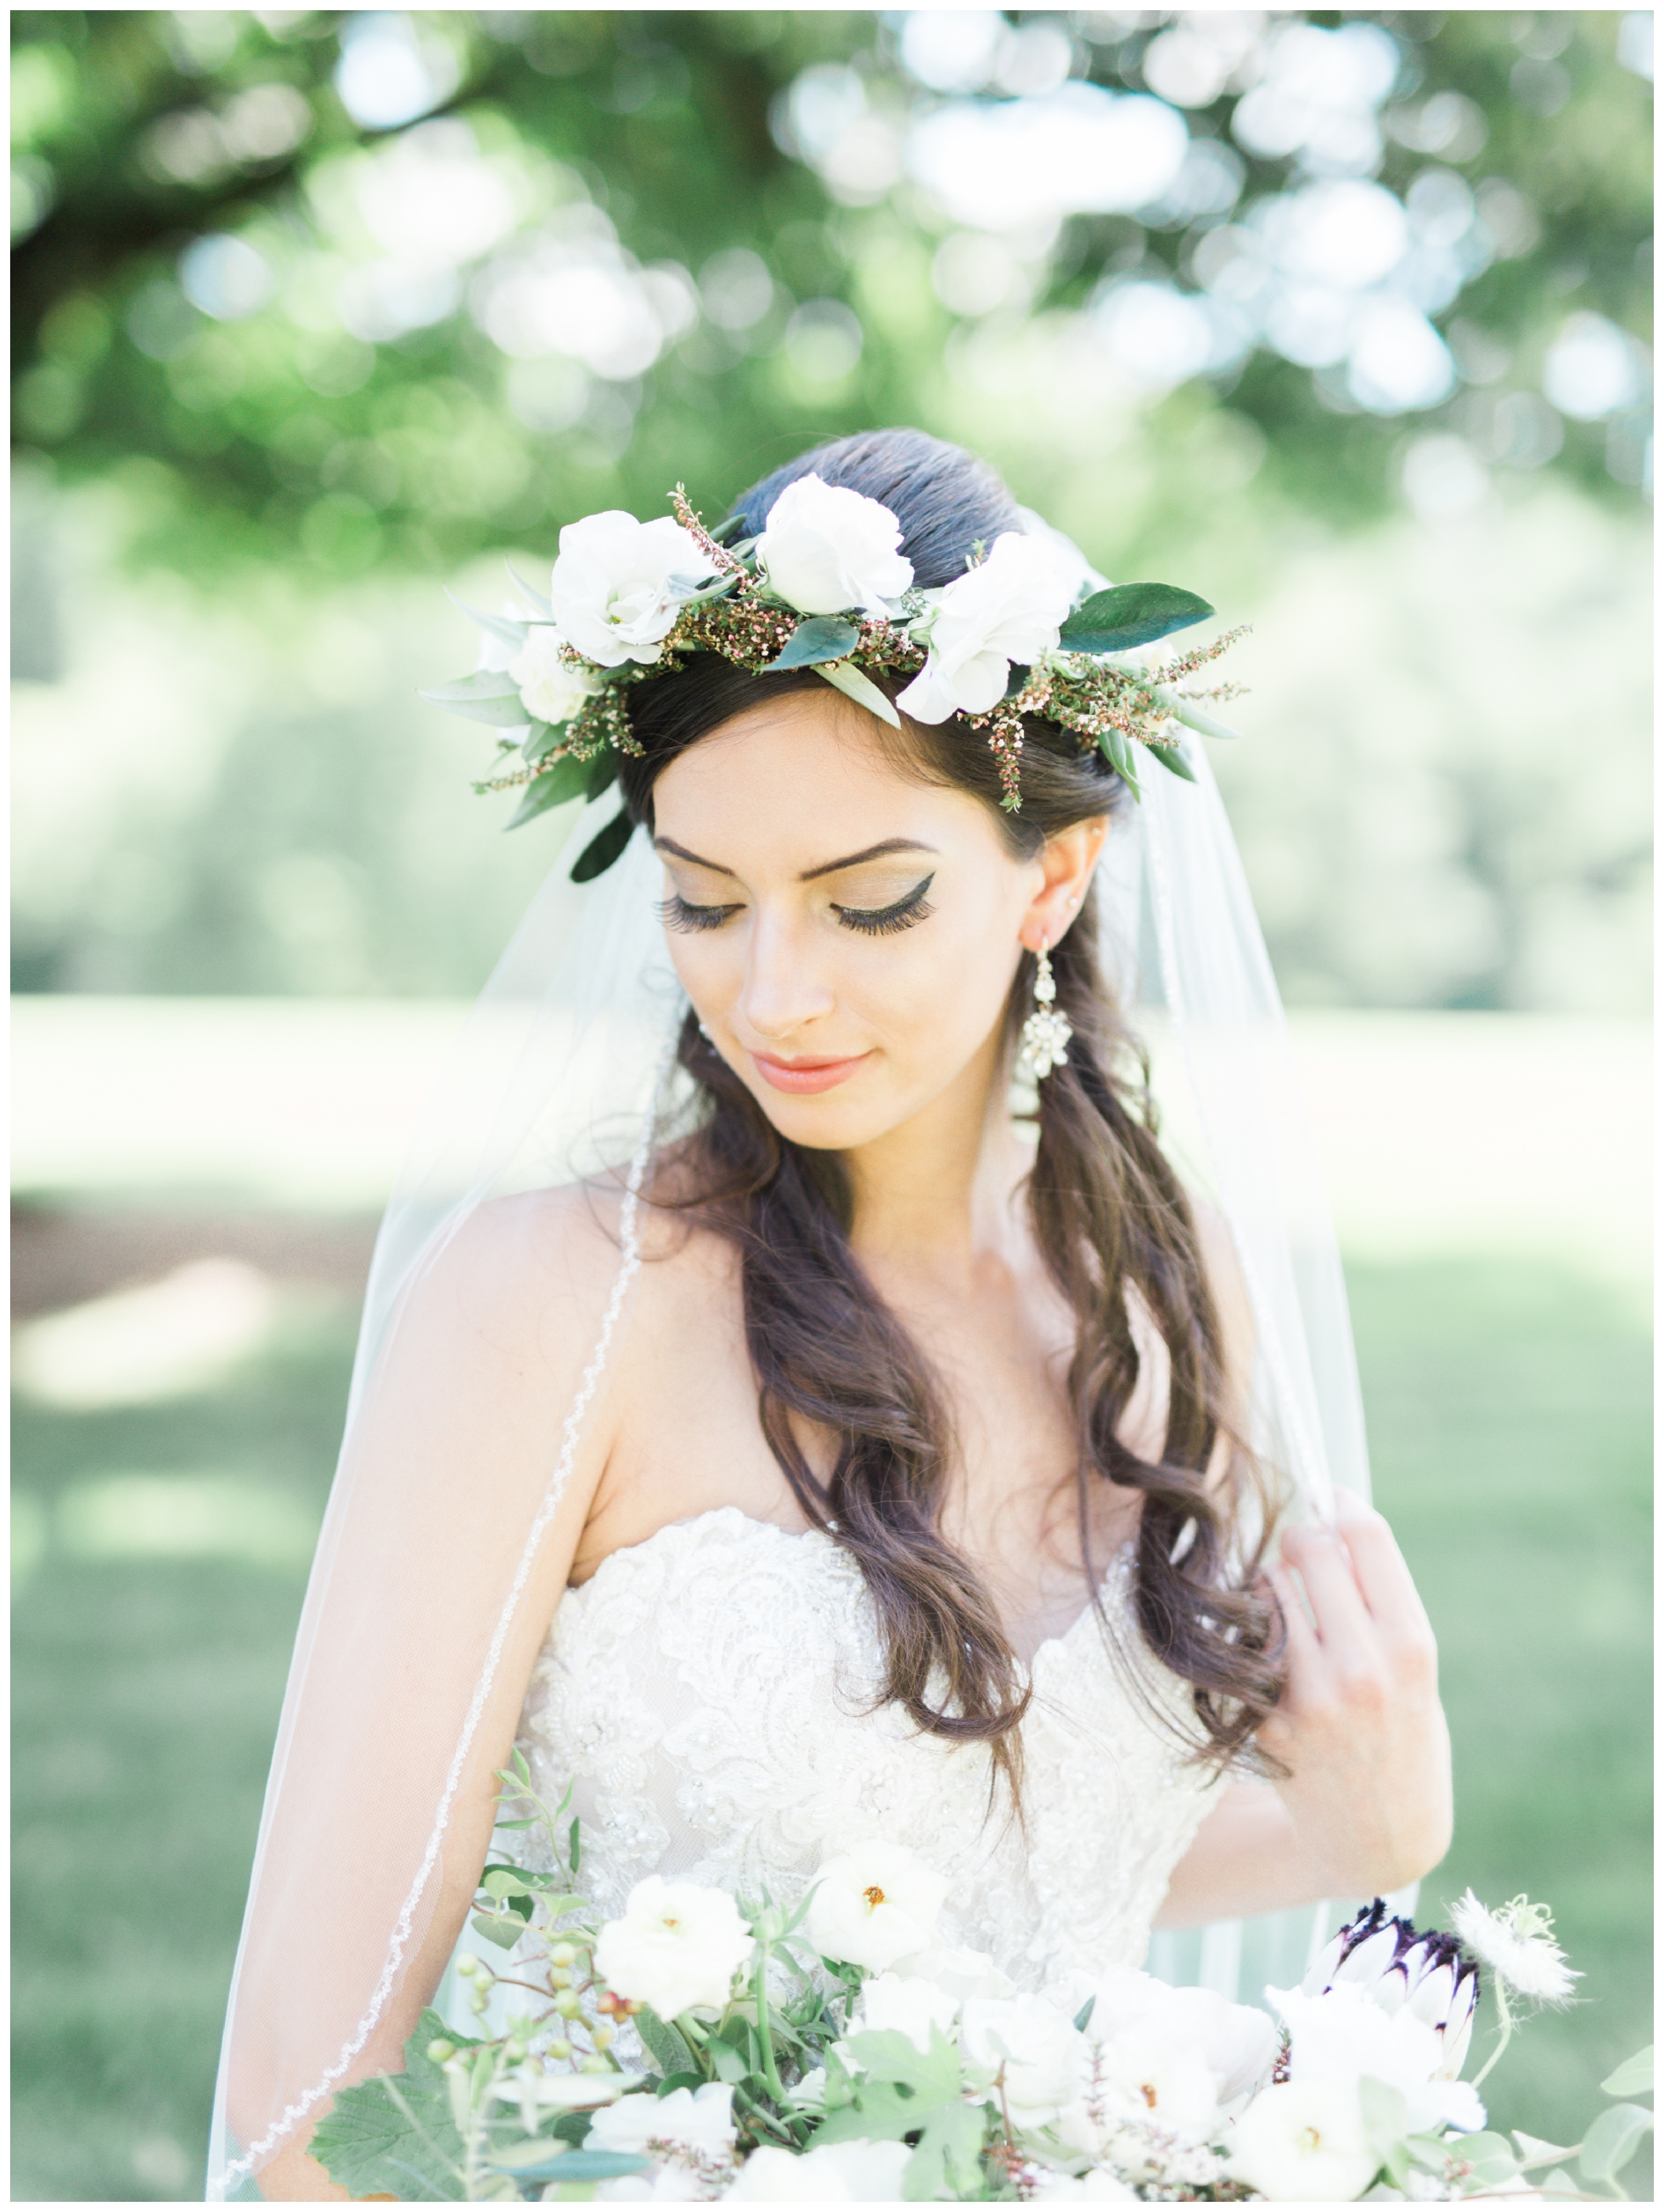 Ethereal Summer Wedding with Floral Crowns & Dreamy Details at Castle Hill Cider in Keswick, VA